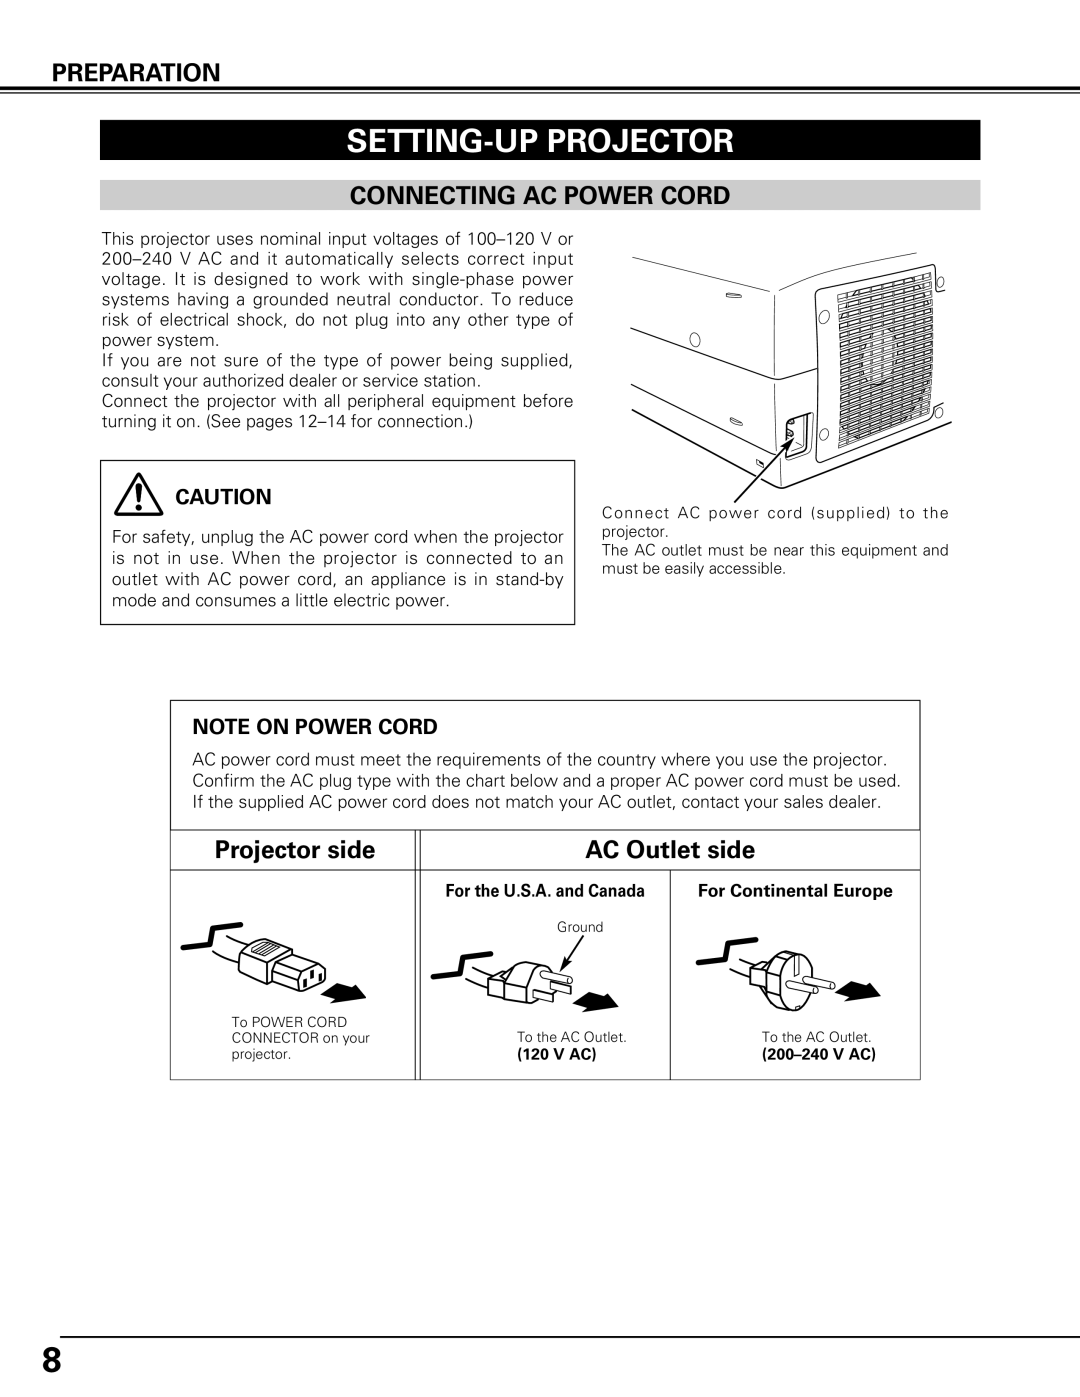 Canon LV-7575 user manual Setting-Up Projector, Preparation, Connecting Ac Power Cord, Projector side, AC Outlet side 